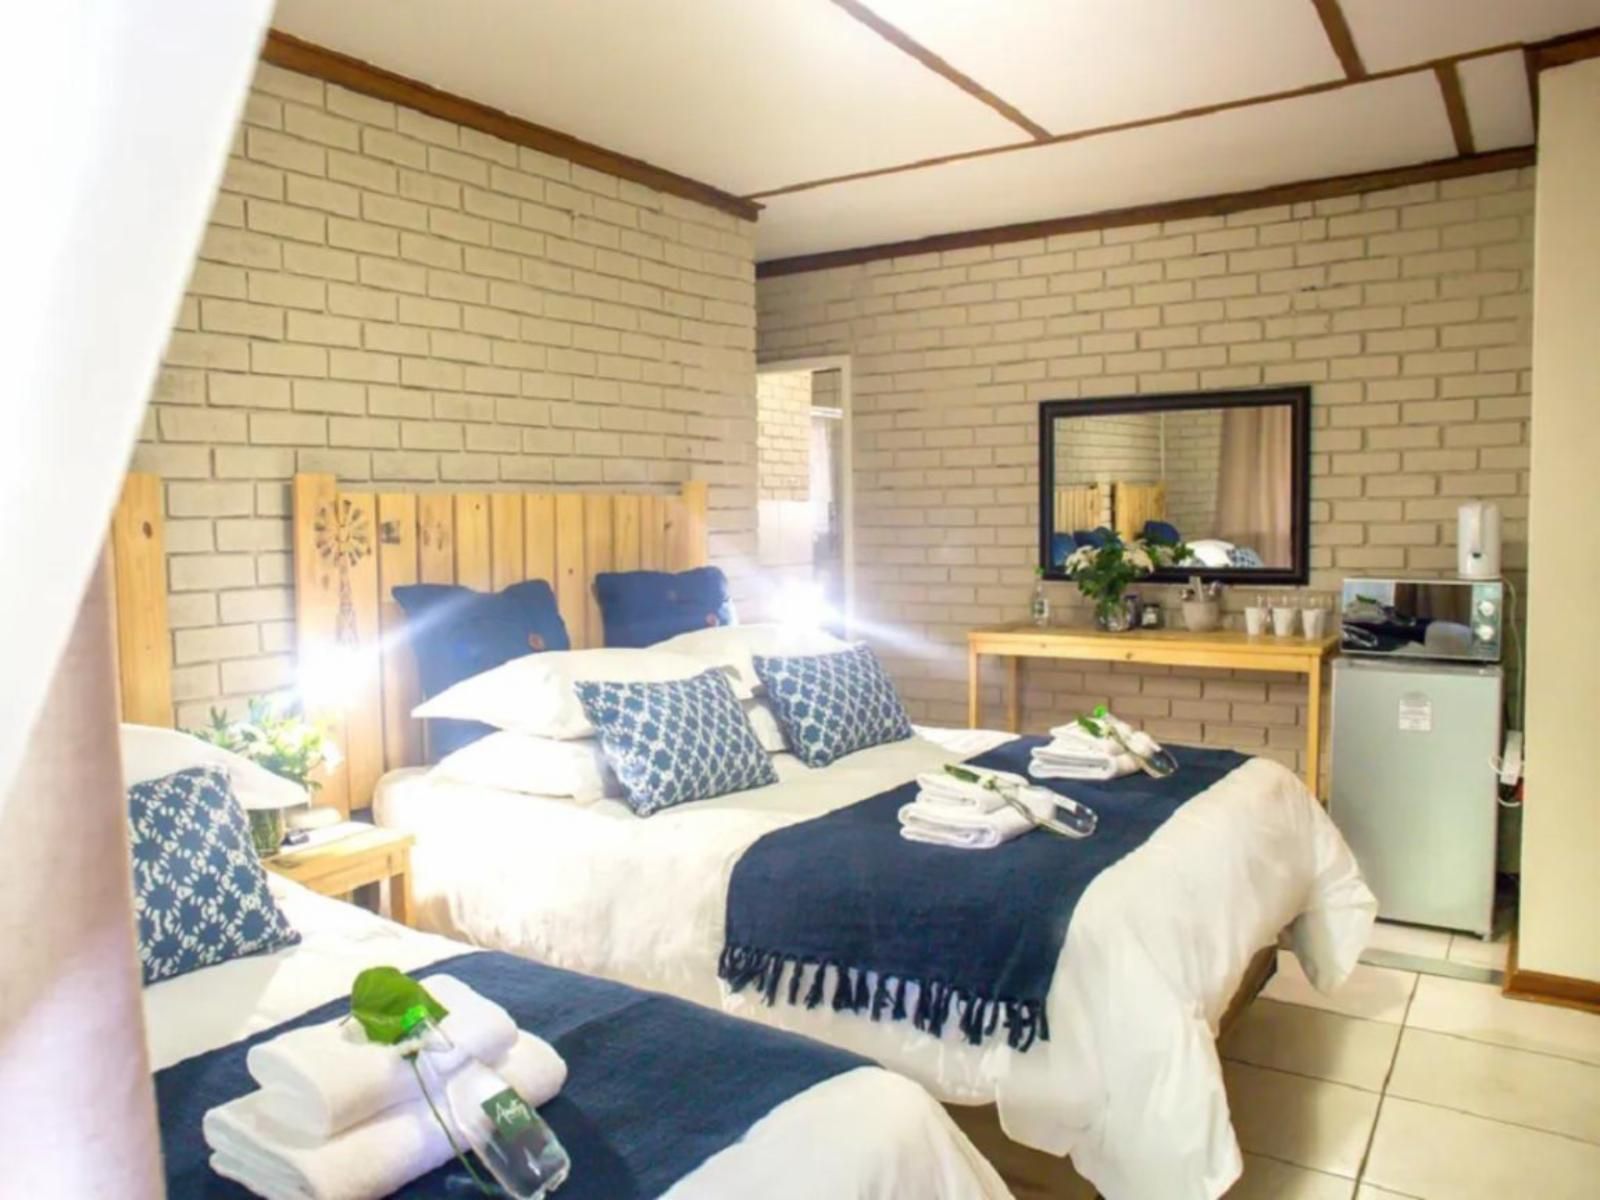 Amity Guesthouse Langenhoven Park Bloemfontein Free State South Africa Bedroom